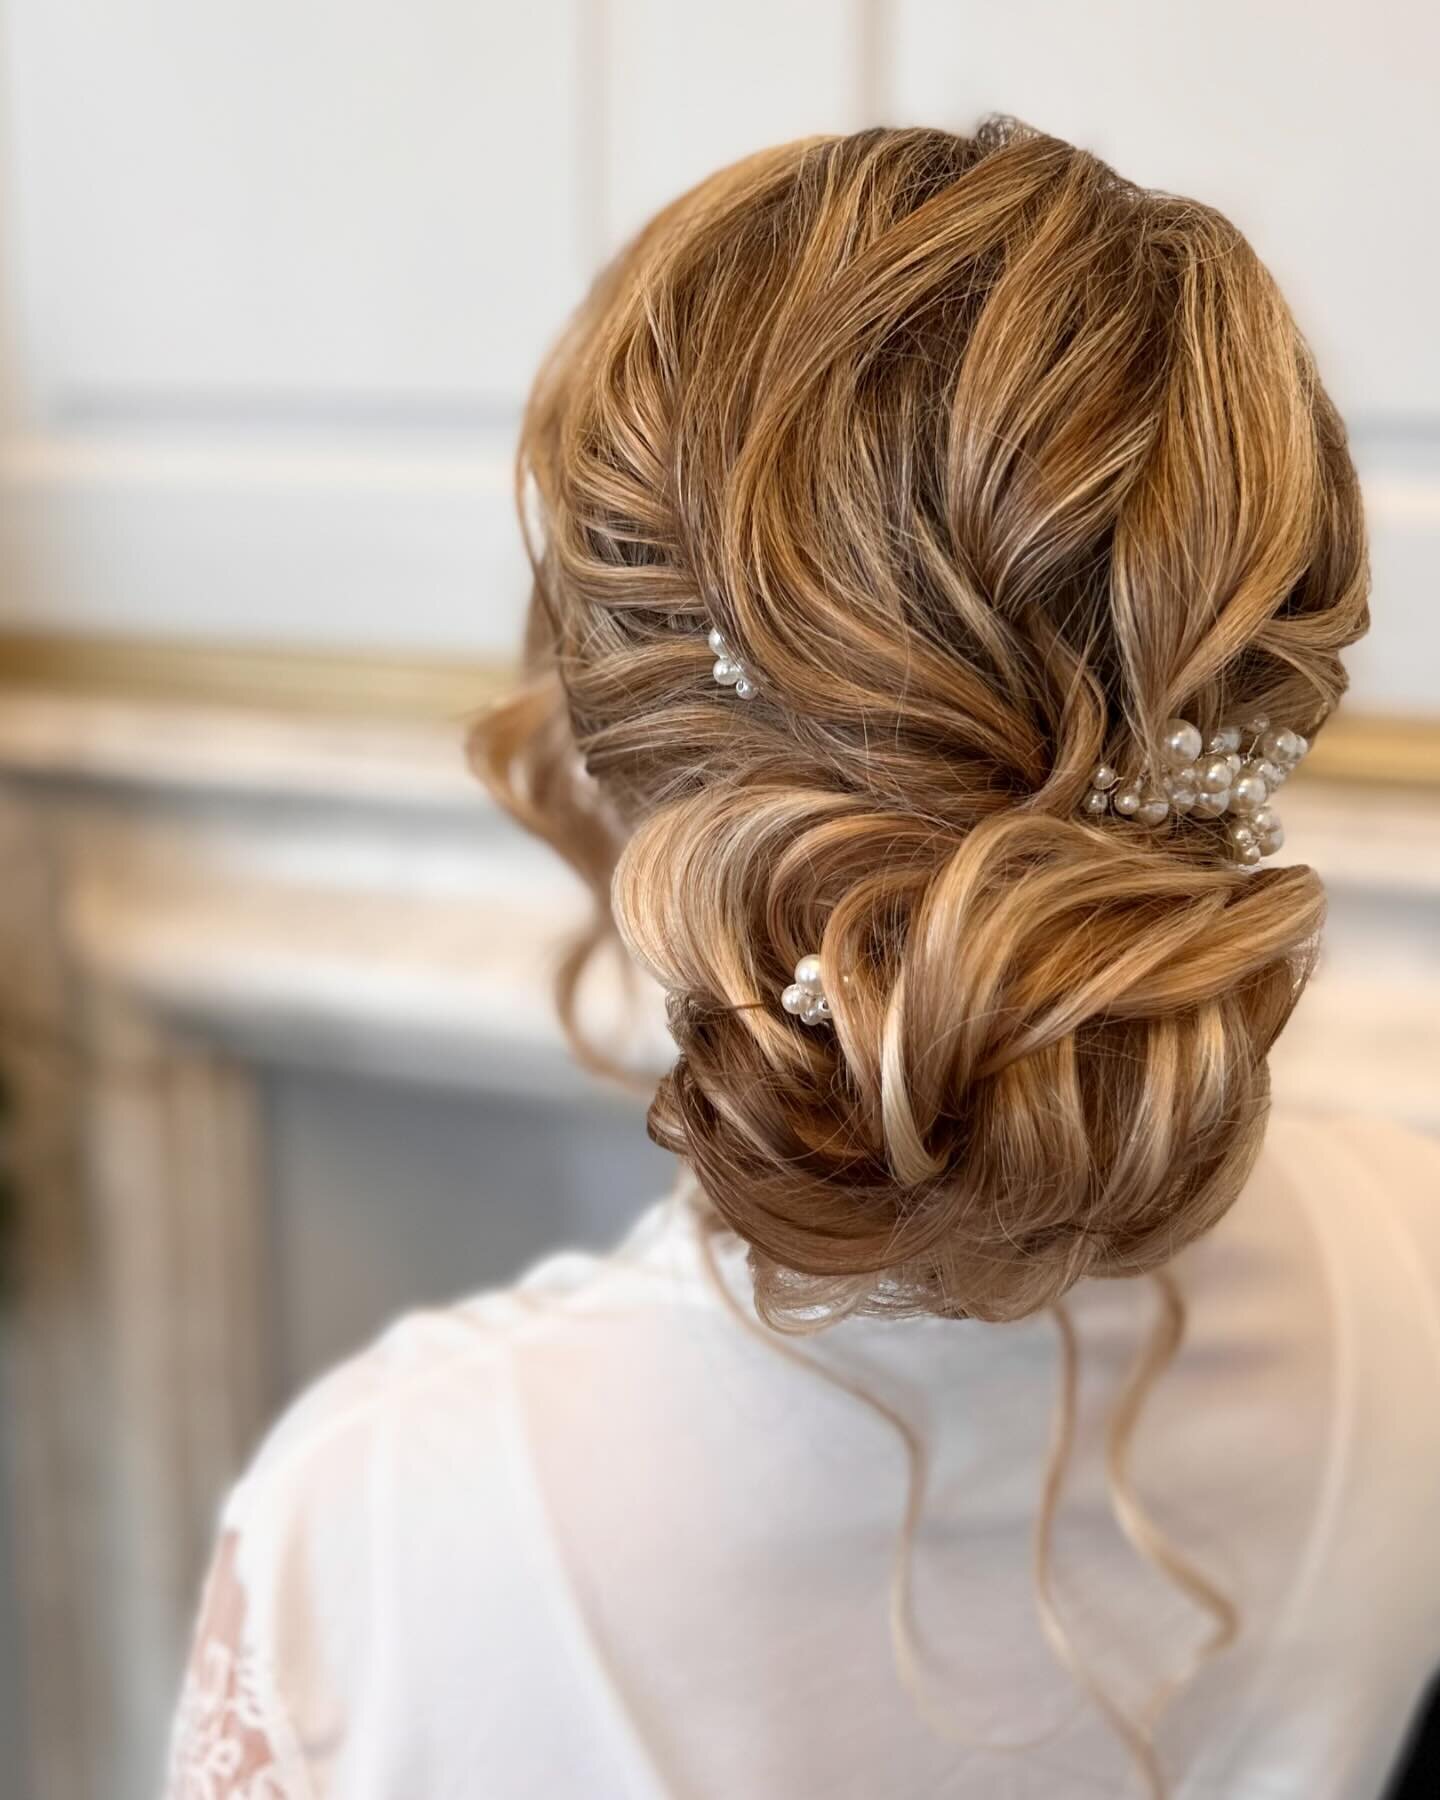 Beautiful Sophie 💖 @gosfieldhallweddingvenue I thought I&rsquo;d post this one again as it&rsquo;s slowly filtering into my brides inspo Saves ! 🎉

Let me know if your a smooth texture kind of girl ? 

Full head of hair extensions for that beautifu